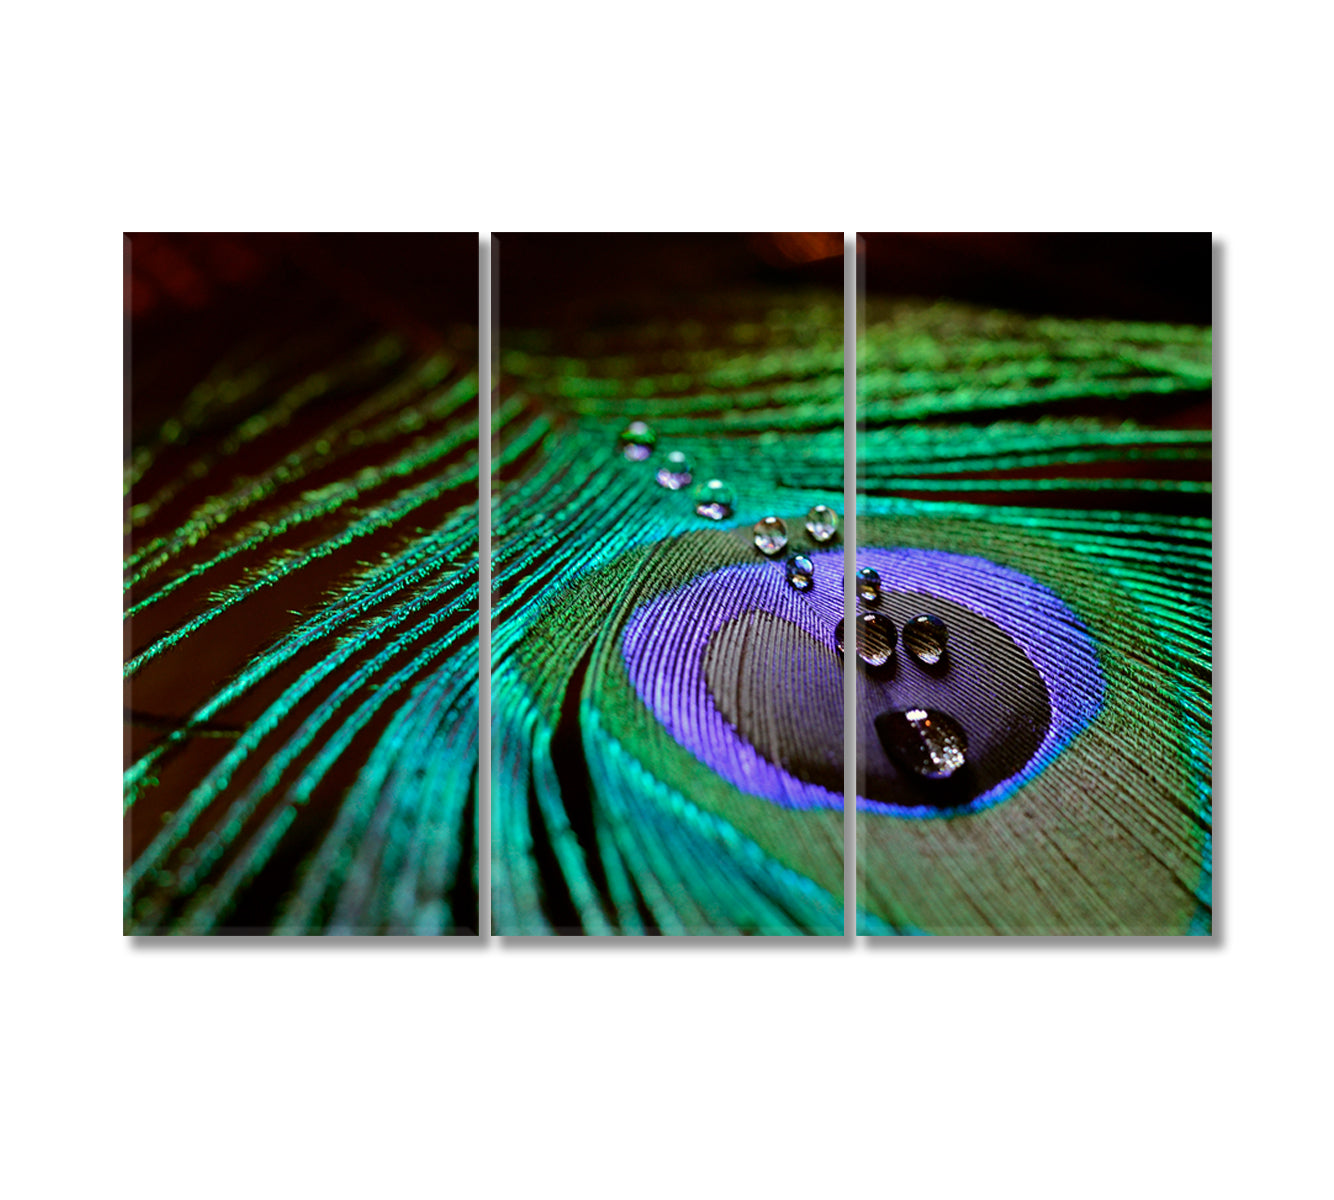 Peacock Feather with Drops of Water Canvas Print-Canvas Print-CetArt-3 Panels-36x24 inches-CetArt